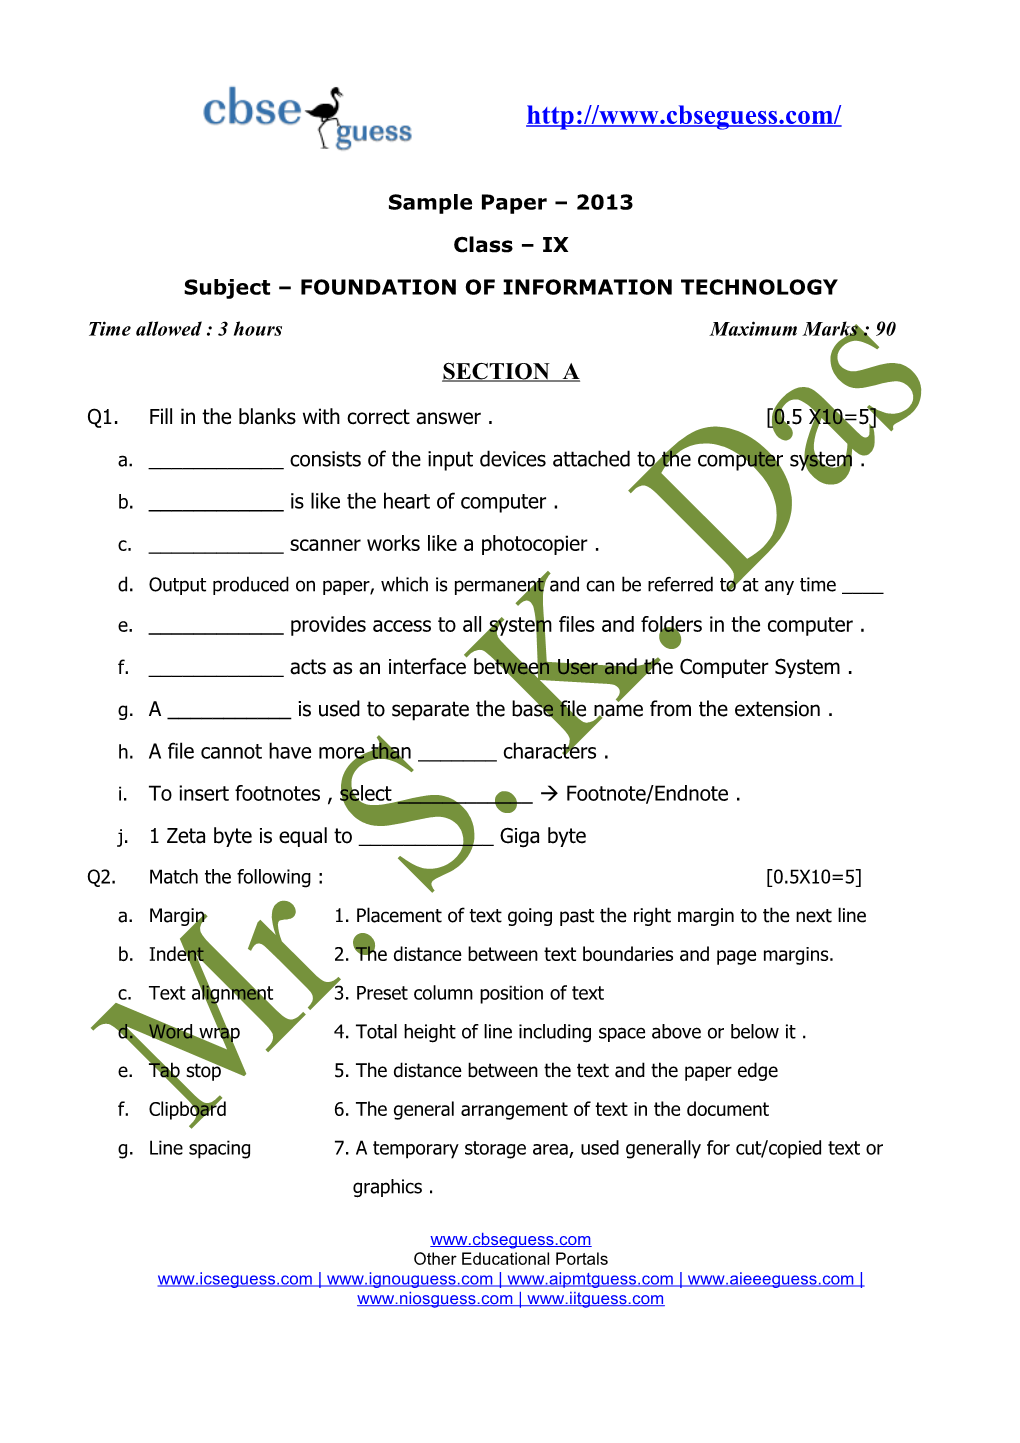 Sample Paper 2013 Class IX Subject FOUNDATION of INFORMATION TECHNOLOGY